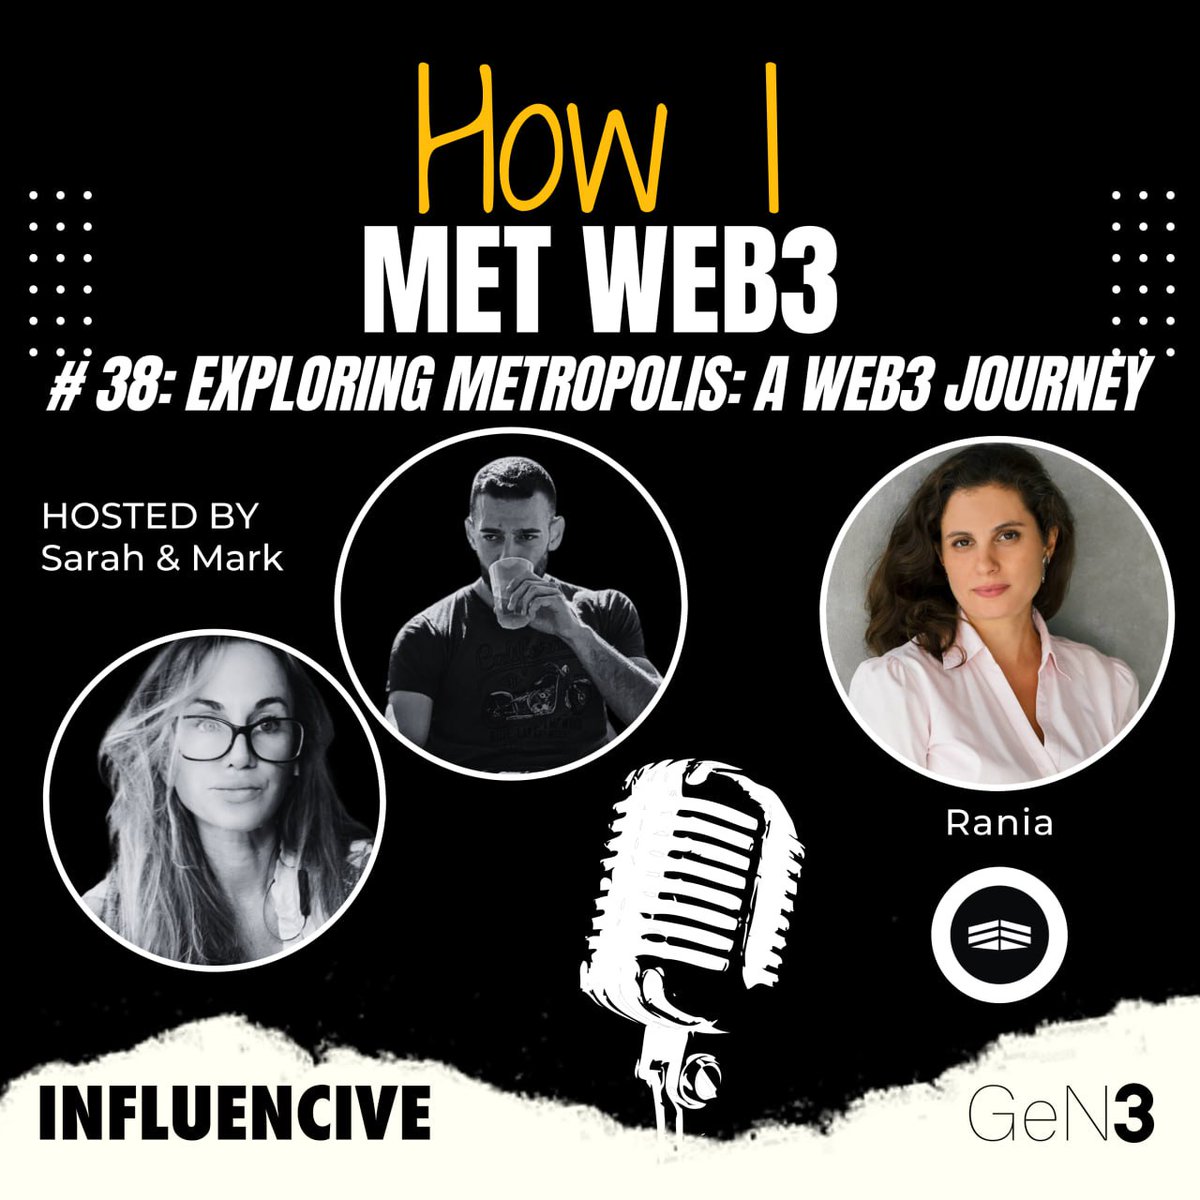 🎙️#38: Exploring Metripolis - A web3 journey @block_editor & @mhl_eth interview @TheRaniaAjami co-founder of @metropolisworld, discussing the fetures offered by their metaverse and the launch of their ERC-20 token. Enter the metropolis now! open.spotify.com/episode/2jWSx1…